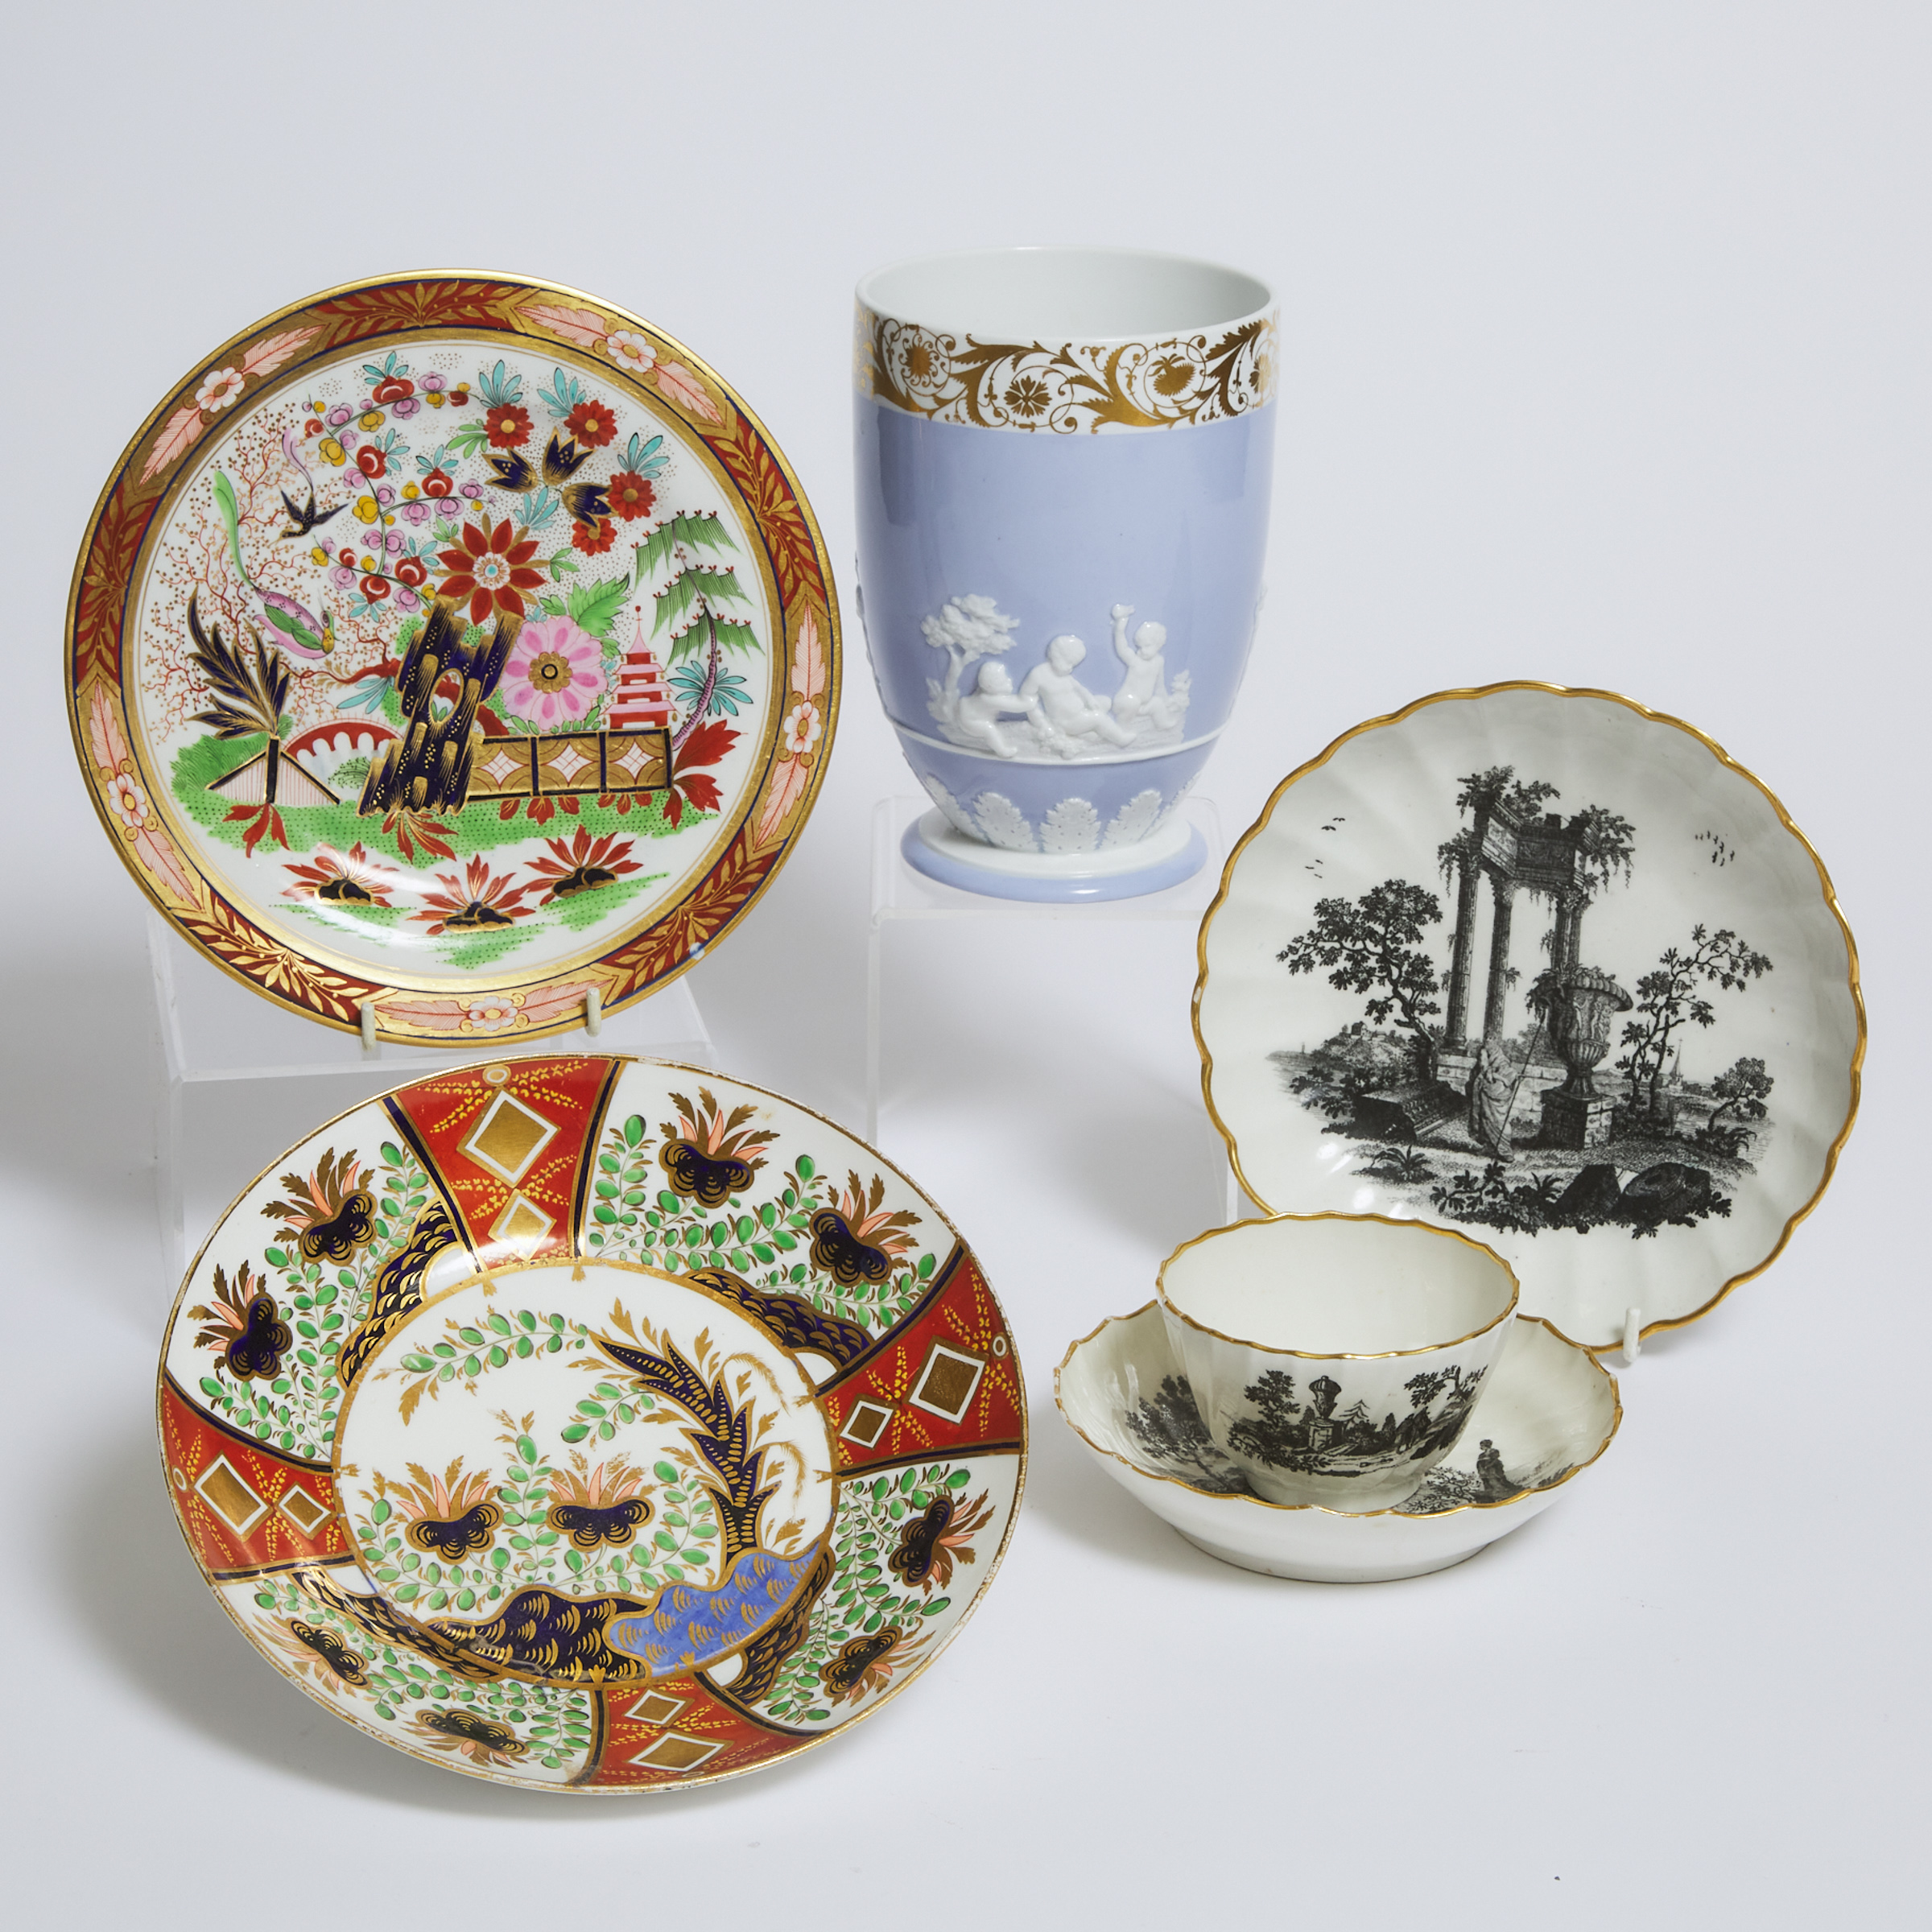 Group of Worcester, Caughley and Spode Porcelain, late 18th/early 19th century